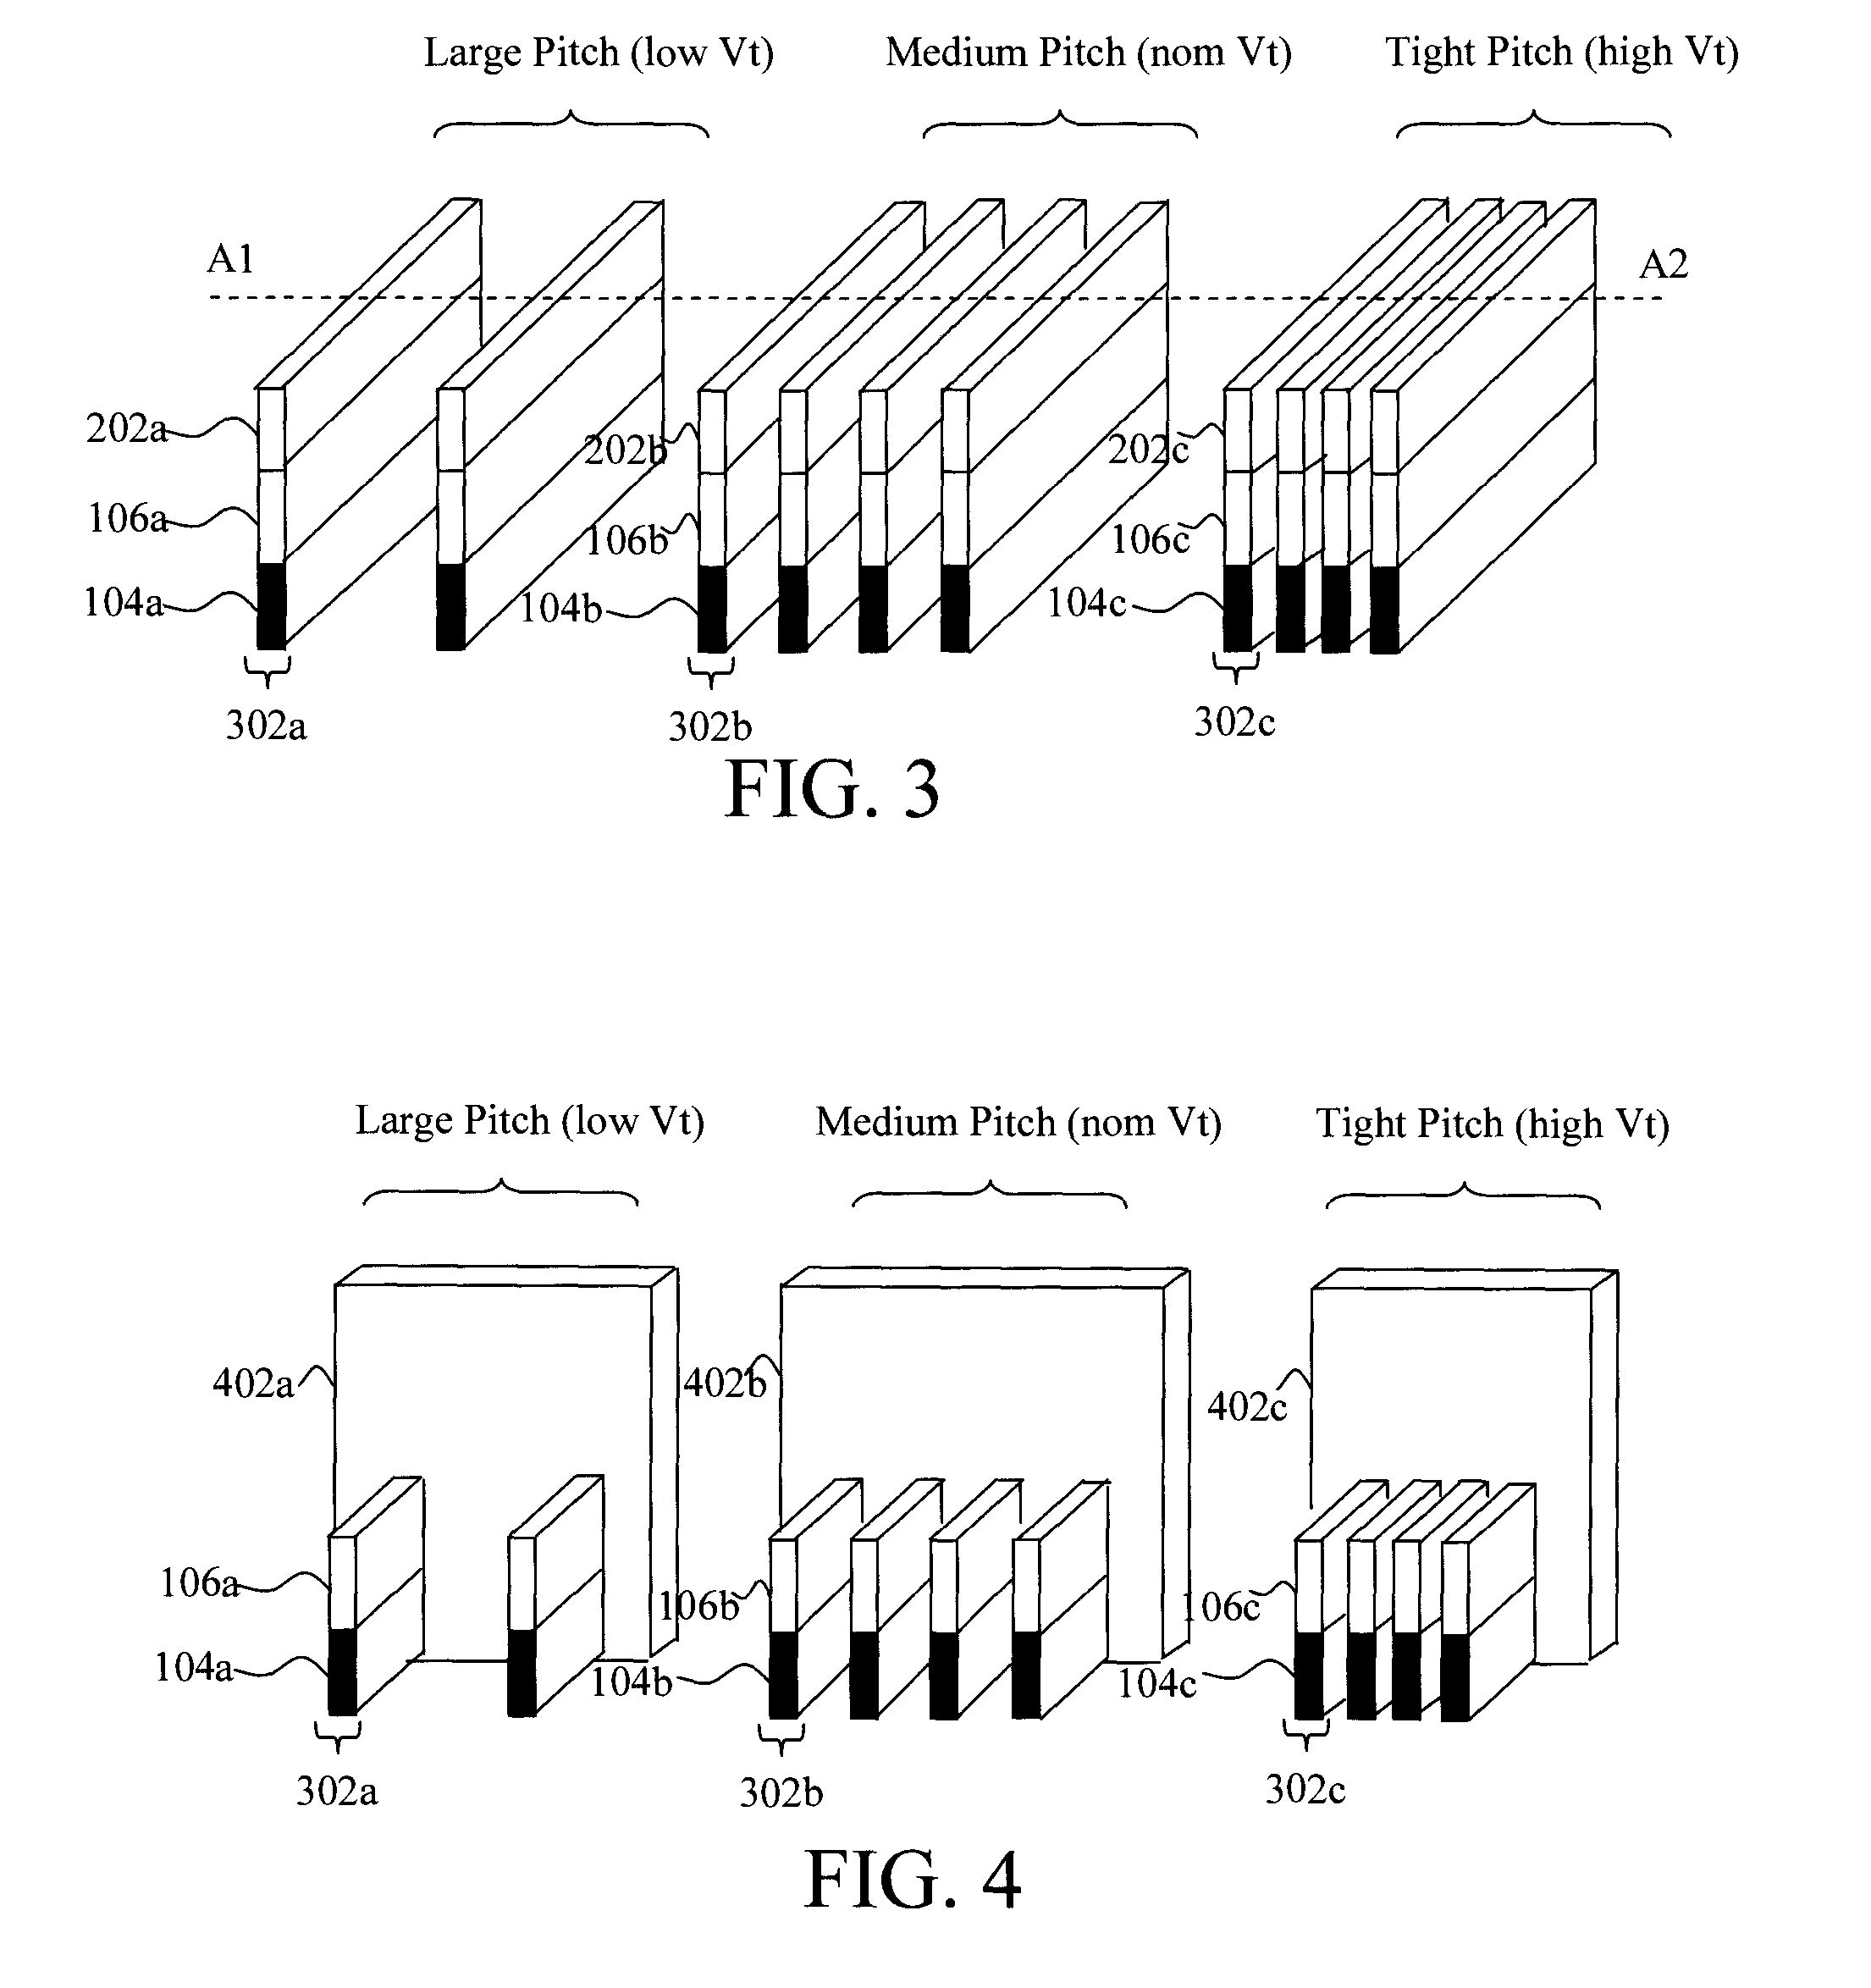 Techniques for metal gate workfunction engineering to enable multiple threshold voltage finfet devices